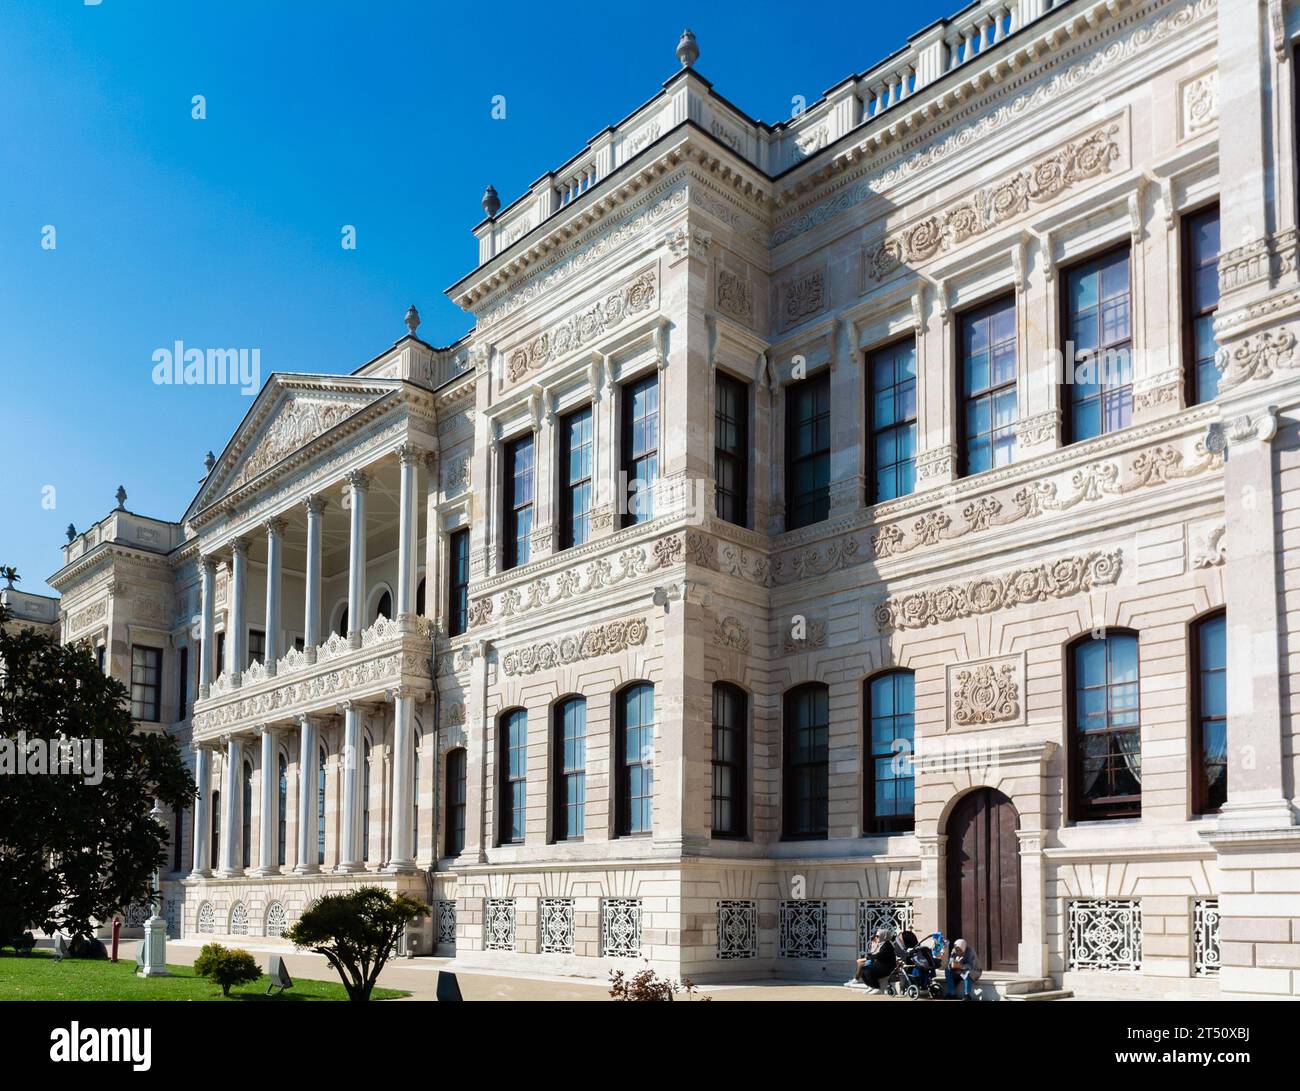 Istanbul, Turkey, National Painting Museum, (Turkish, Milli Saraylar Resim Muzesi) at the courtyard of Dolmabahce Palace. Editorial only. Stock Photo